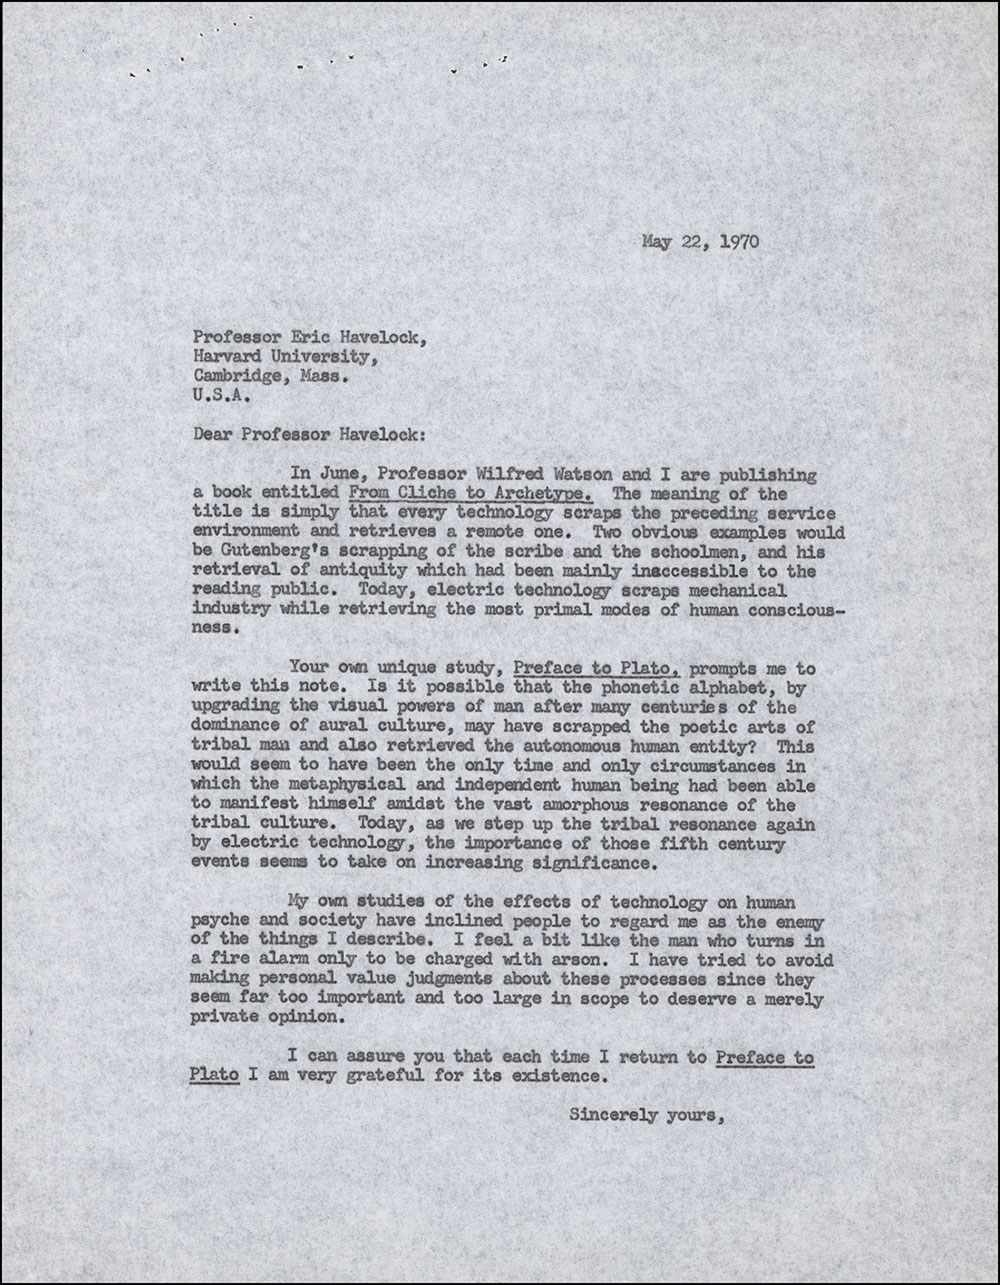 Letter dated May 22, 1970 to Eric Havelock